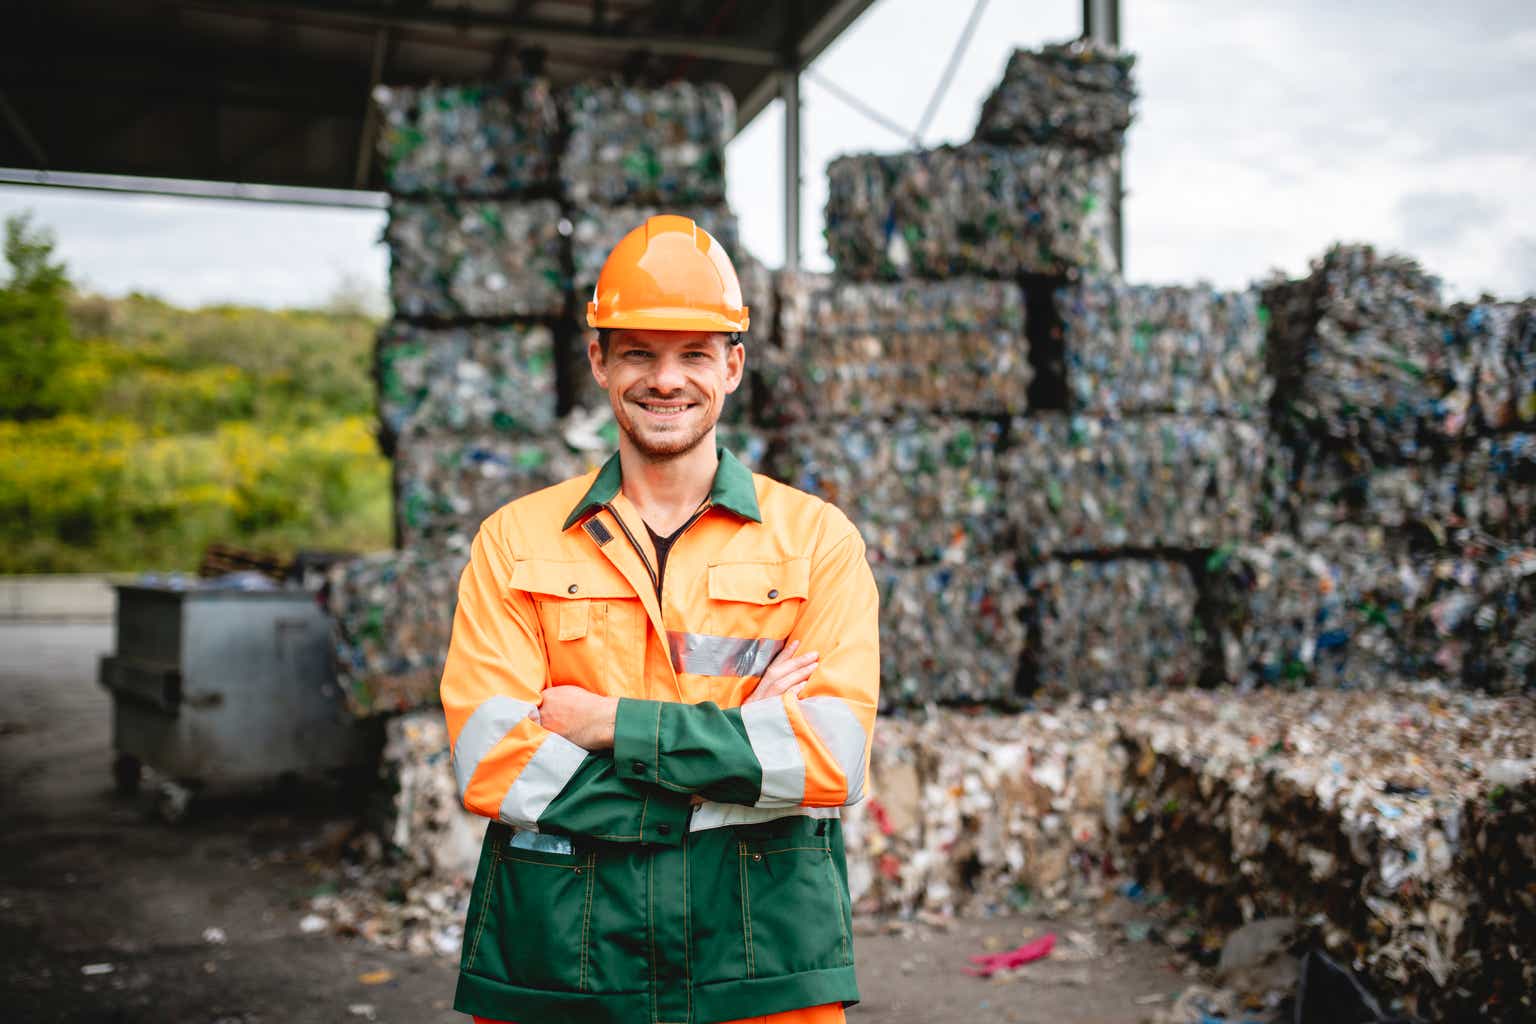 Waste Connections Stock: Highly Attractive Business But Not So Much For The Valuation